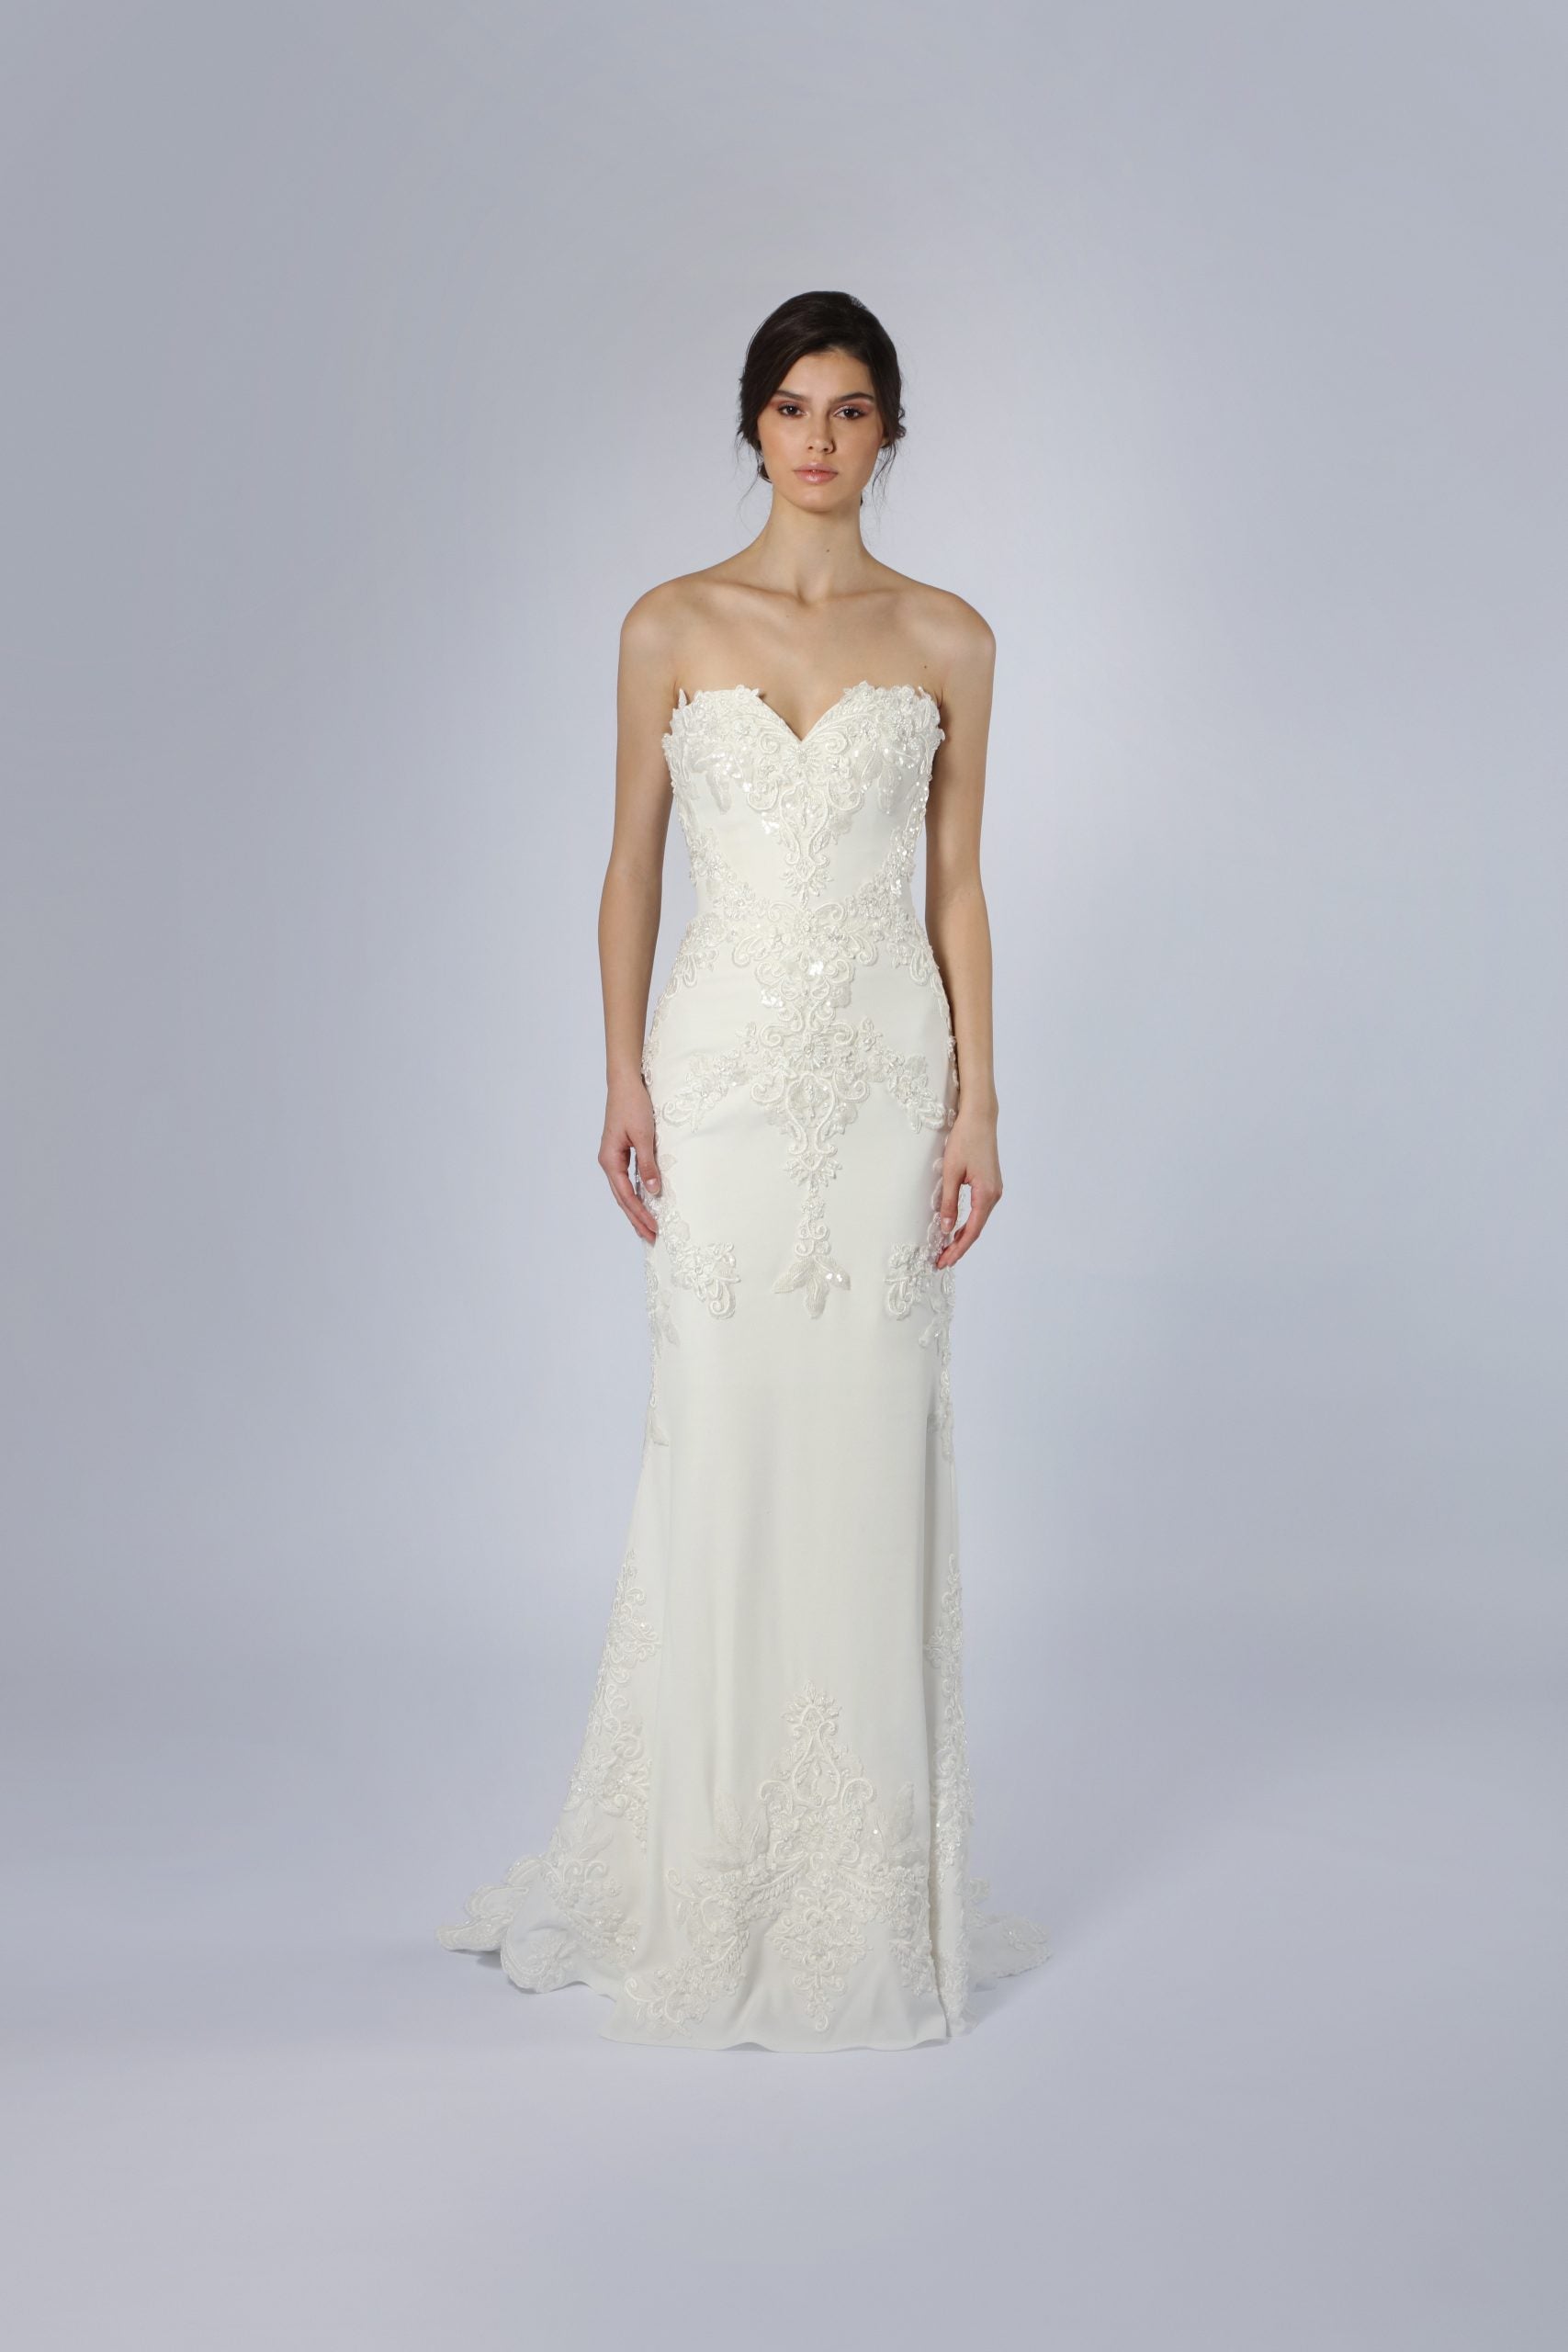 Strapless Sweetheart Fit-and-Flare Gown by Tony Ward - Image 1